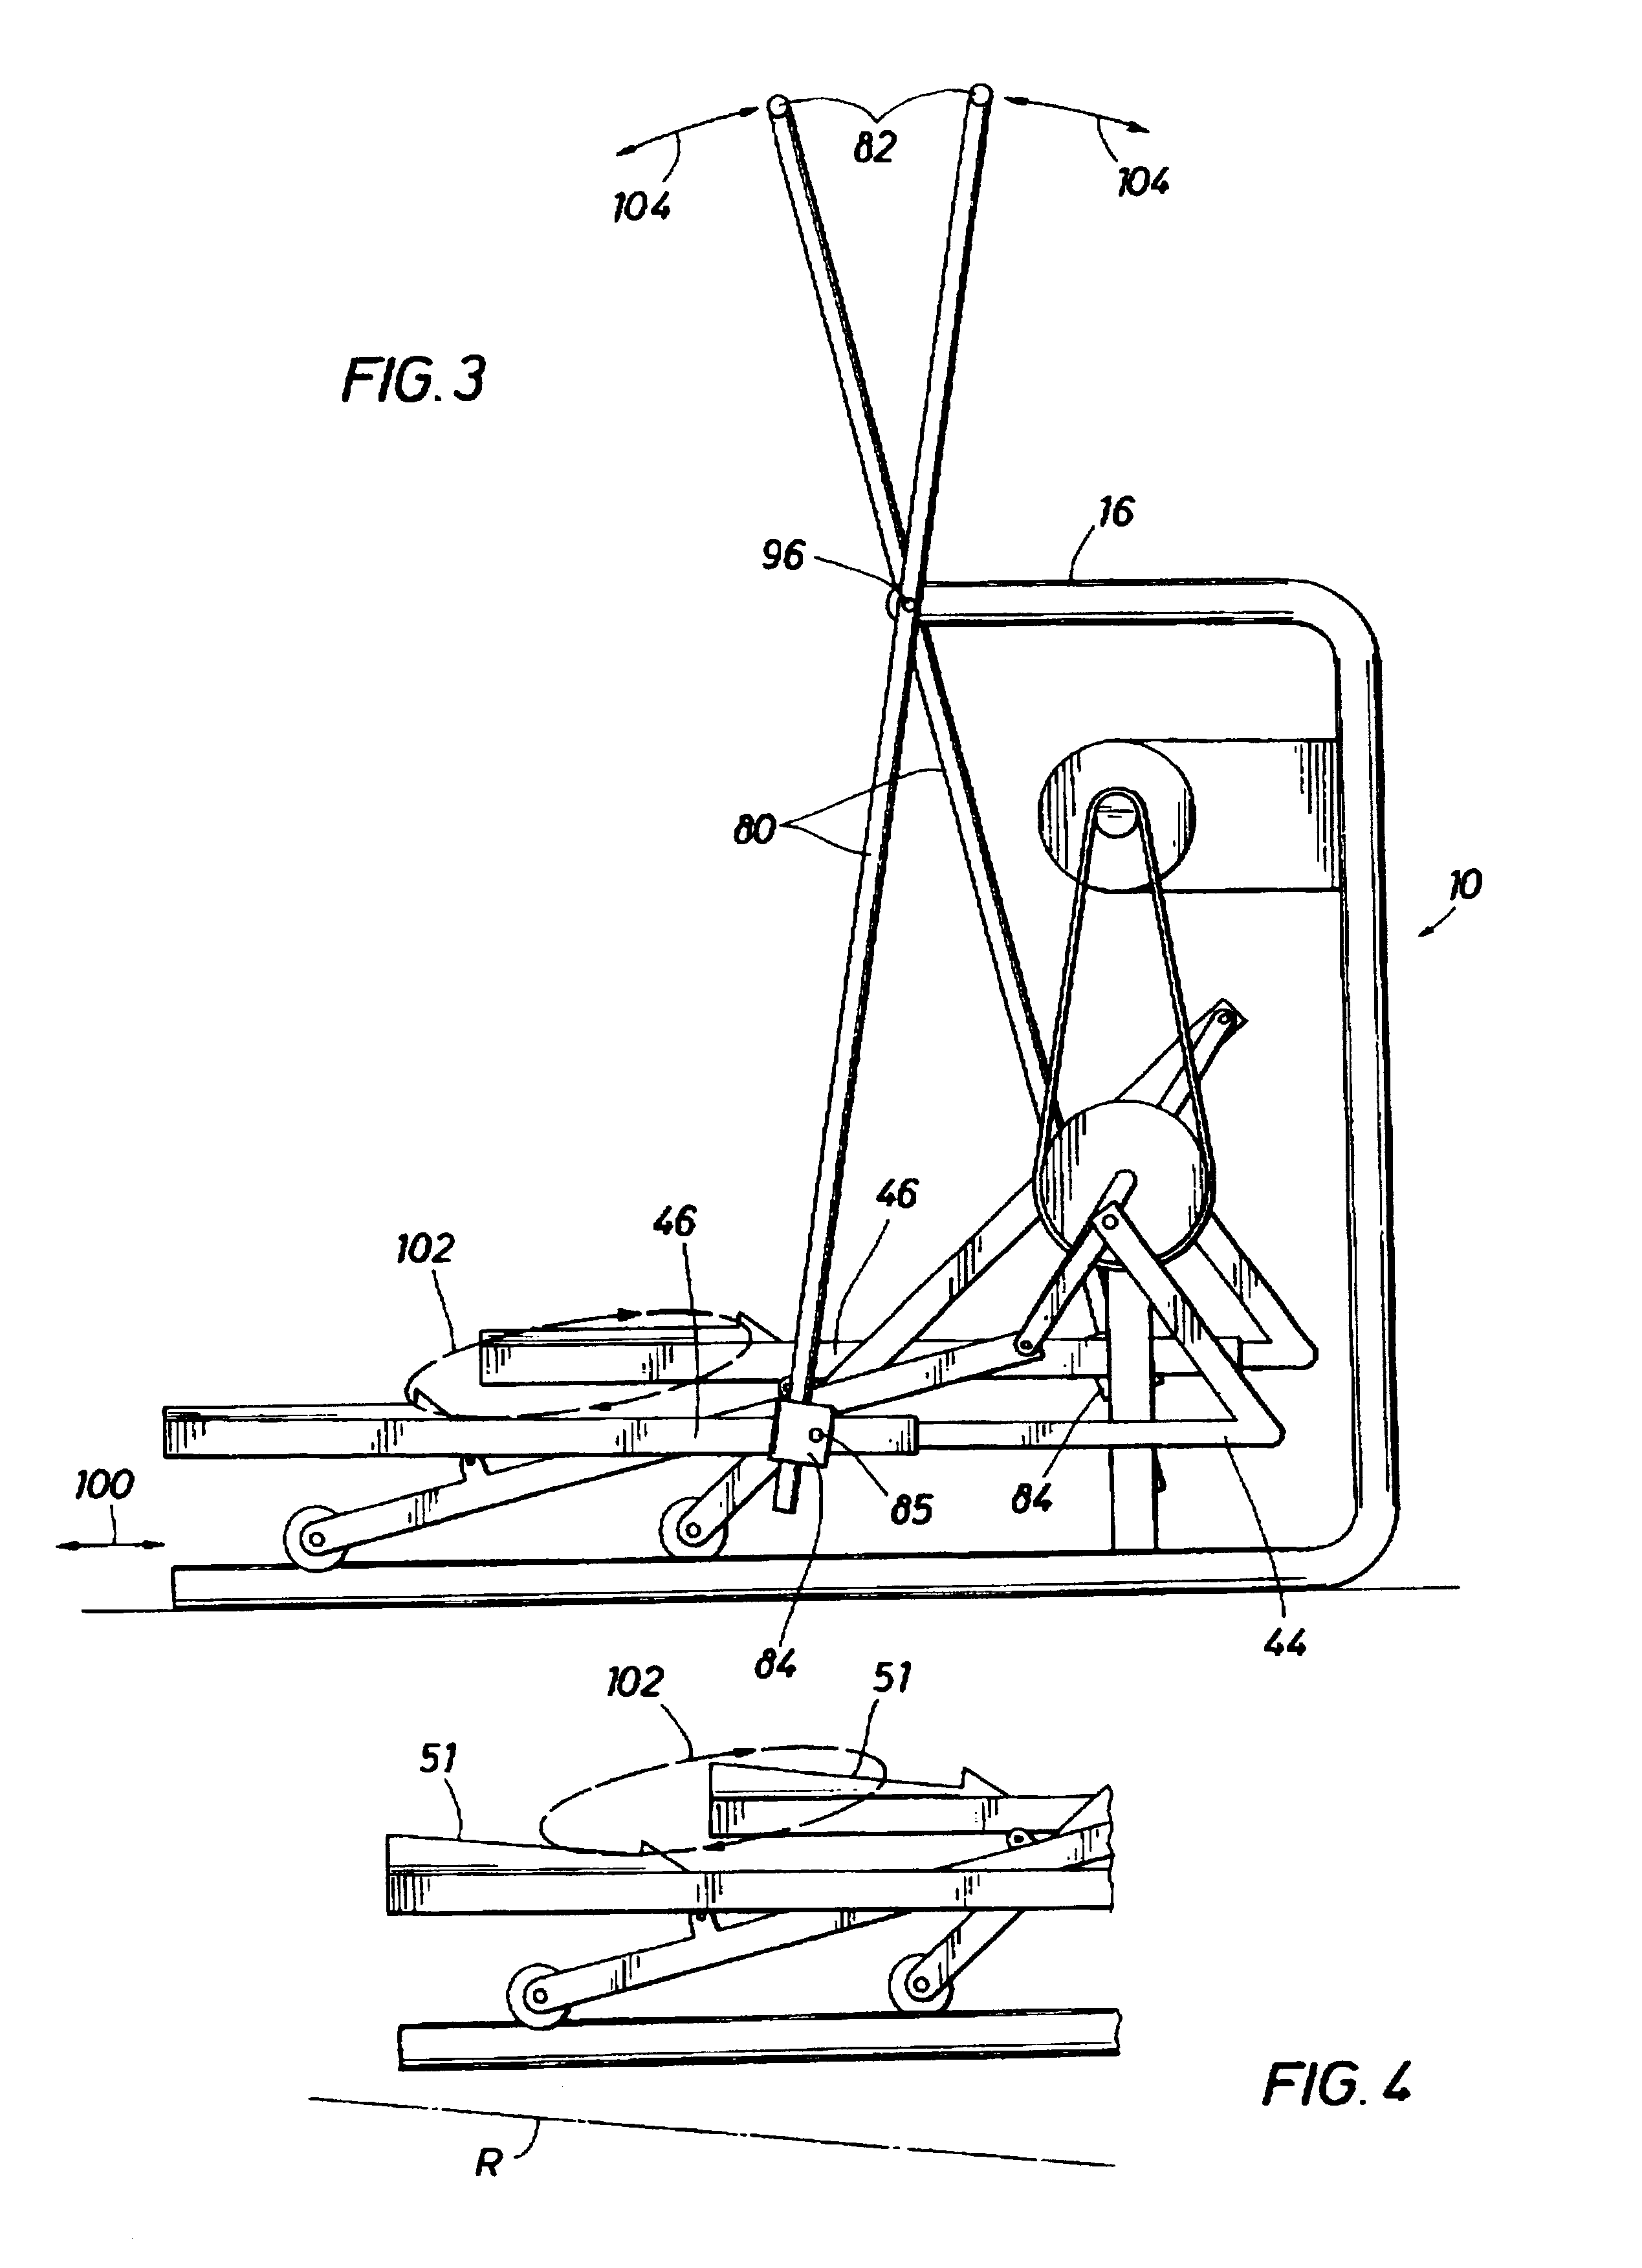 Stationary exercise apparatus having a preferred foot platform path